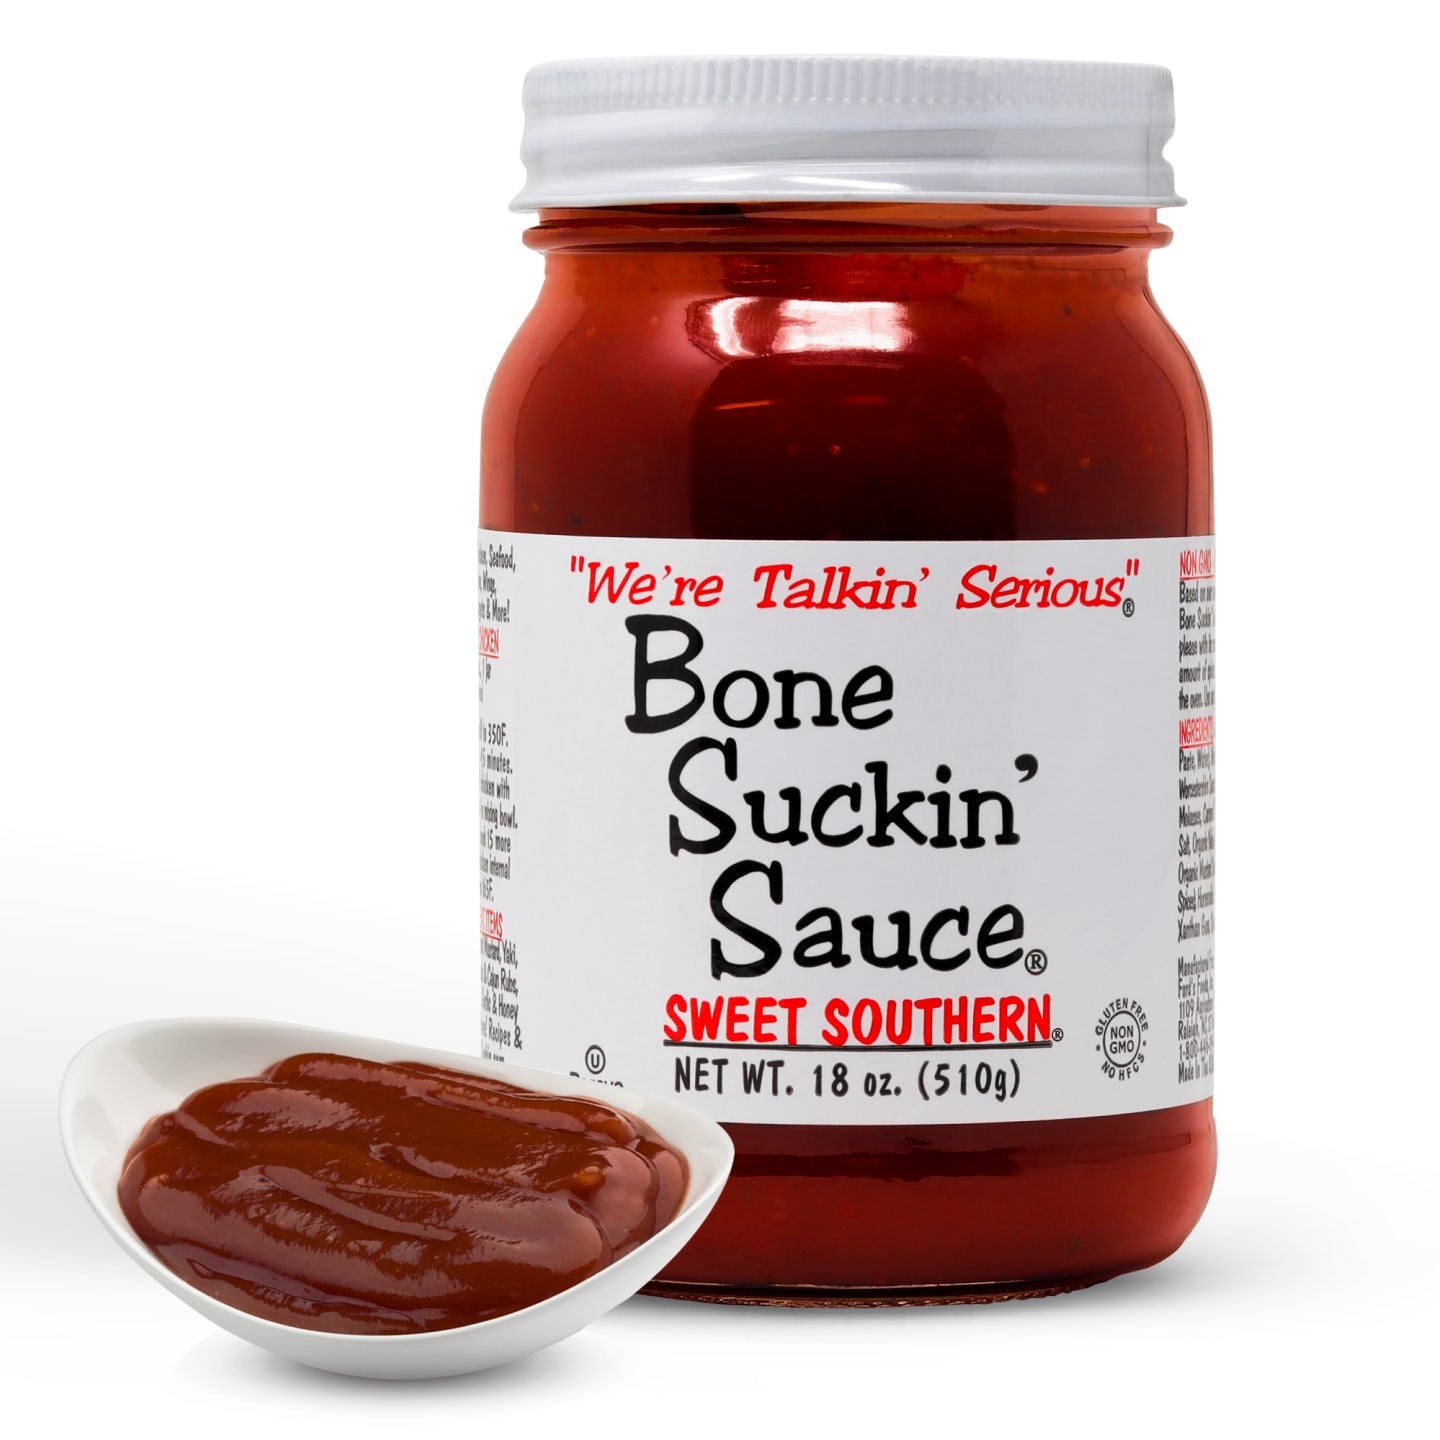 Bone Suckin Sauce Sweet Southern, 18 oz, Glass Jar Bone Suckin' Sauce is the small batch craft barbecue sauce that is 3rd party tested & verified, Made in the USA in glass bottles, beloved by the entire family for its delicuous taste and unmatched versatility. This exceptional sauce is Non-GMO, Gluten-Free, Kosher and has No High Fructose Corn Syrup, offering both health-consciousness and unparalleled taste and quality.